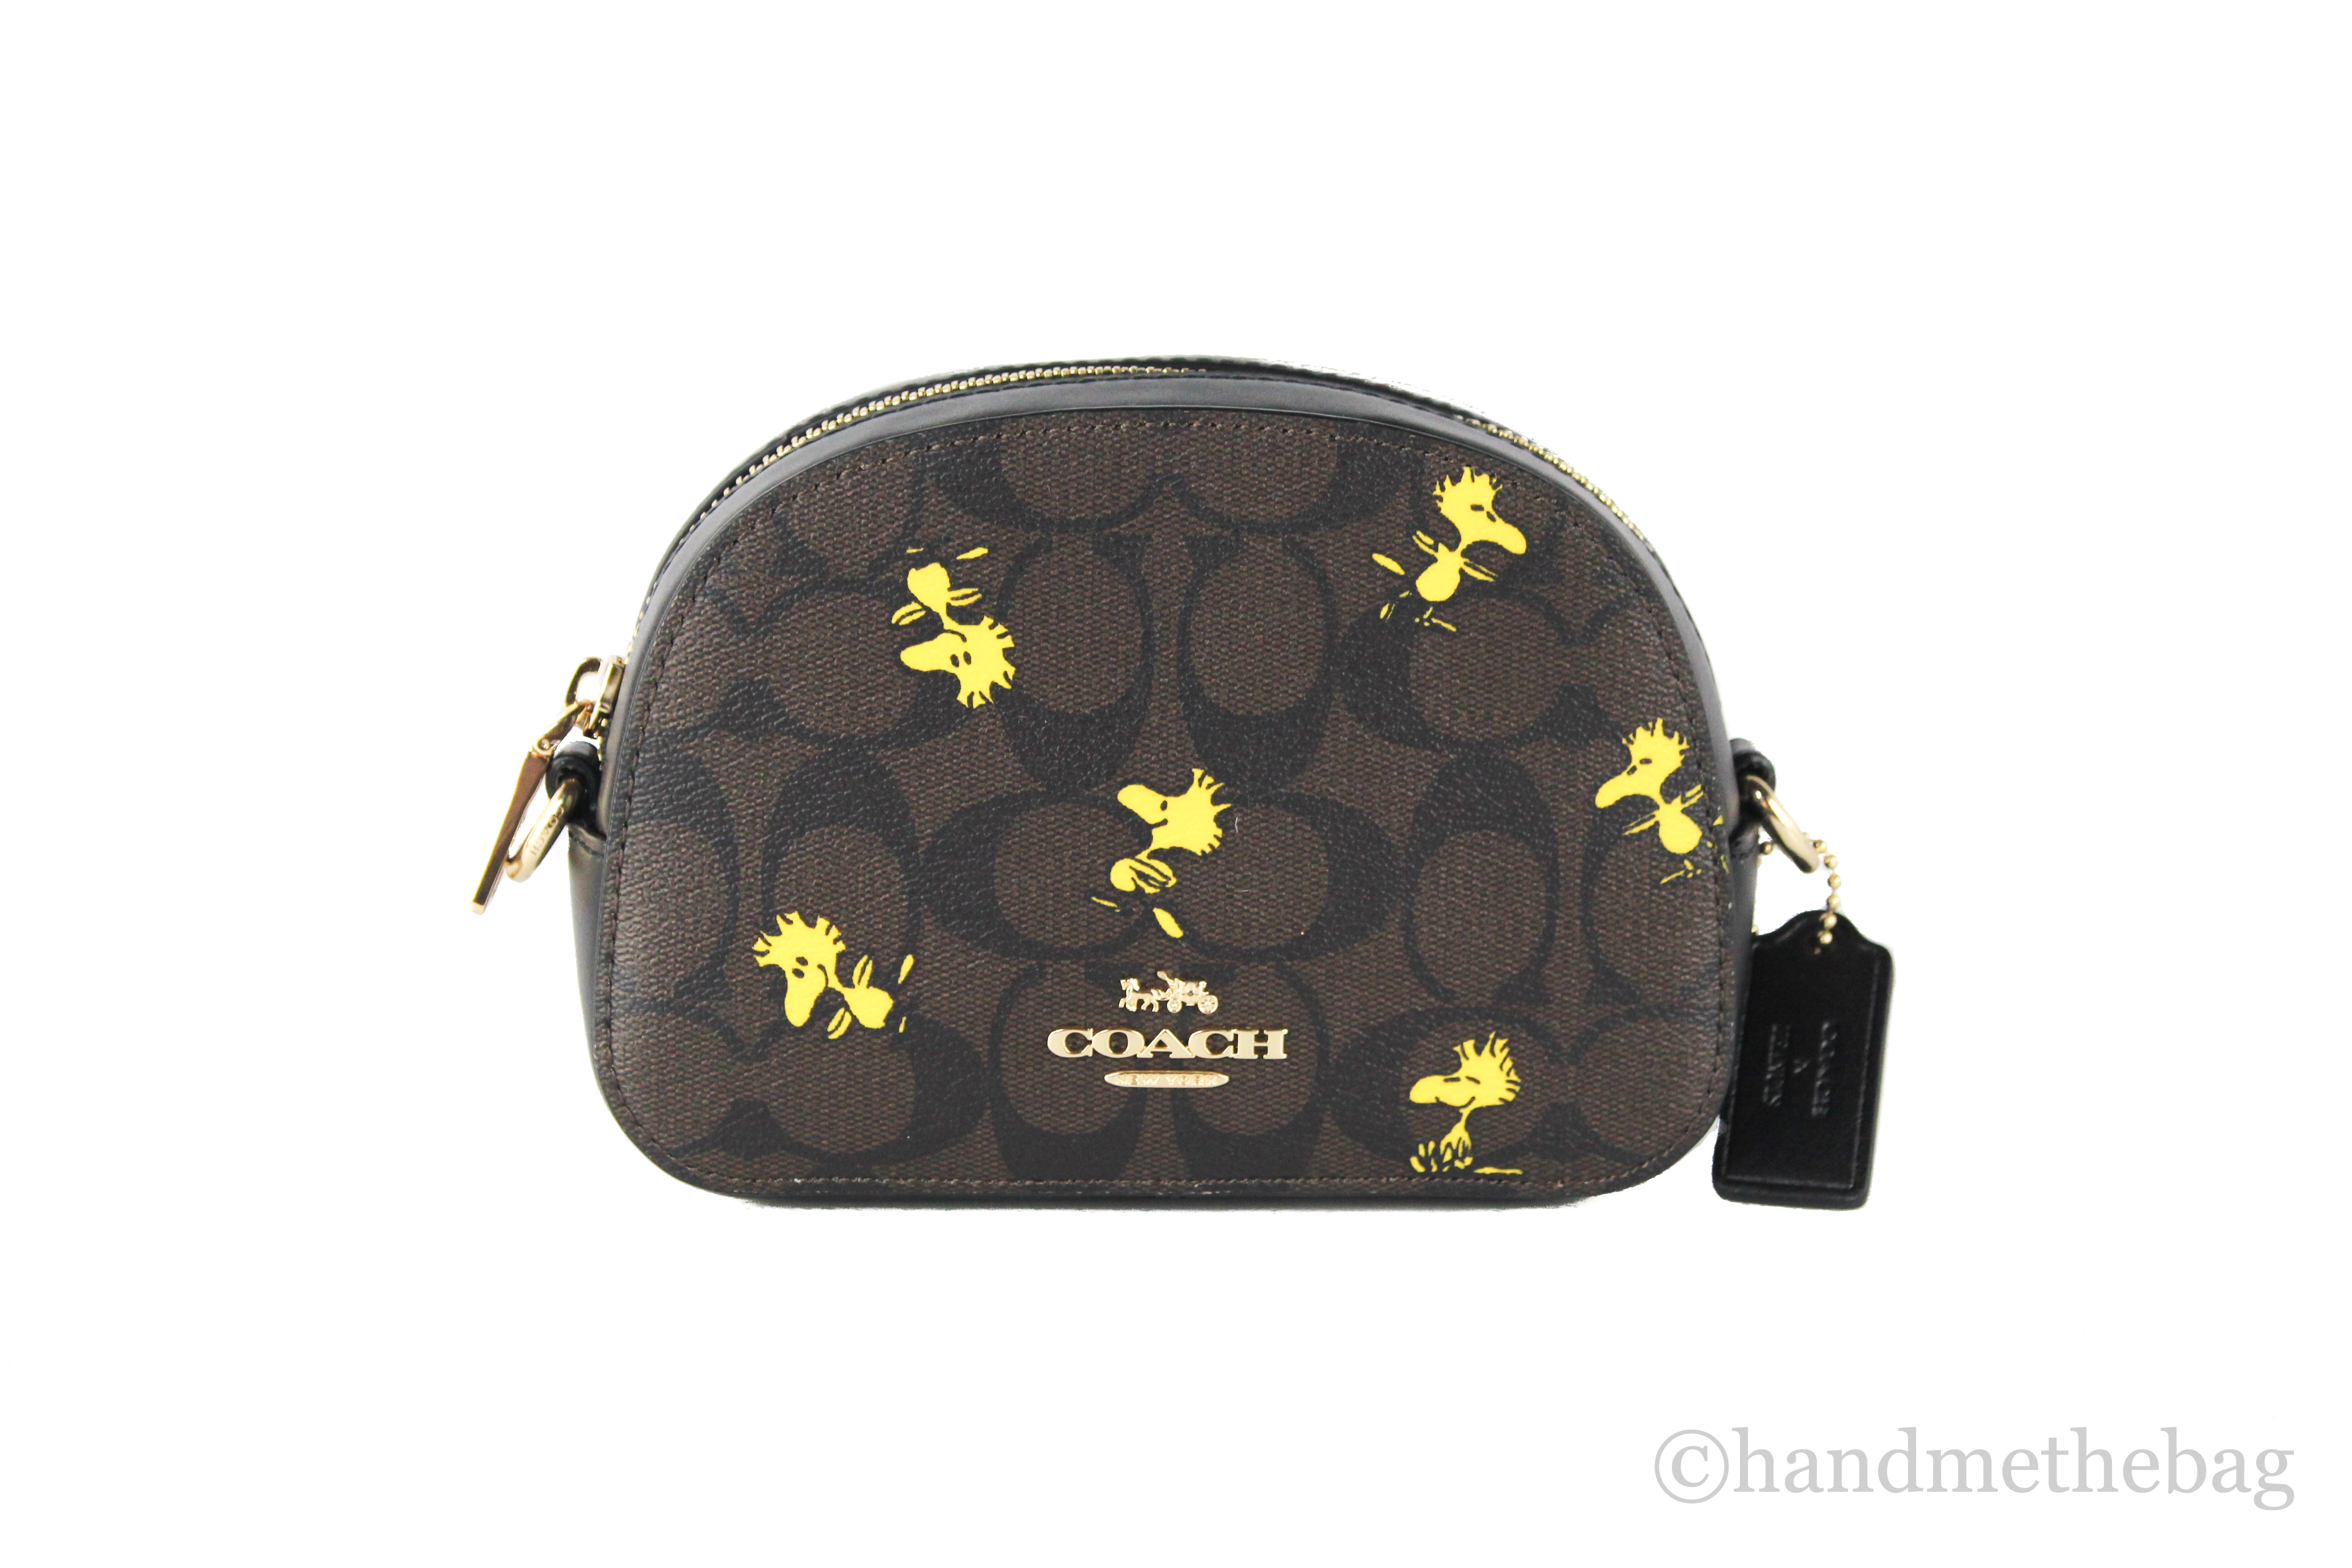 Coach X Peanuts Mini Serena Satchel With Snoopy And Friends